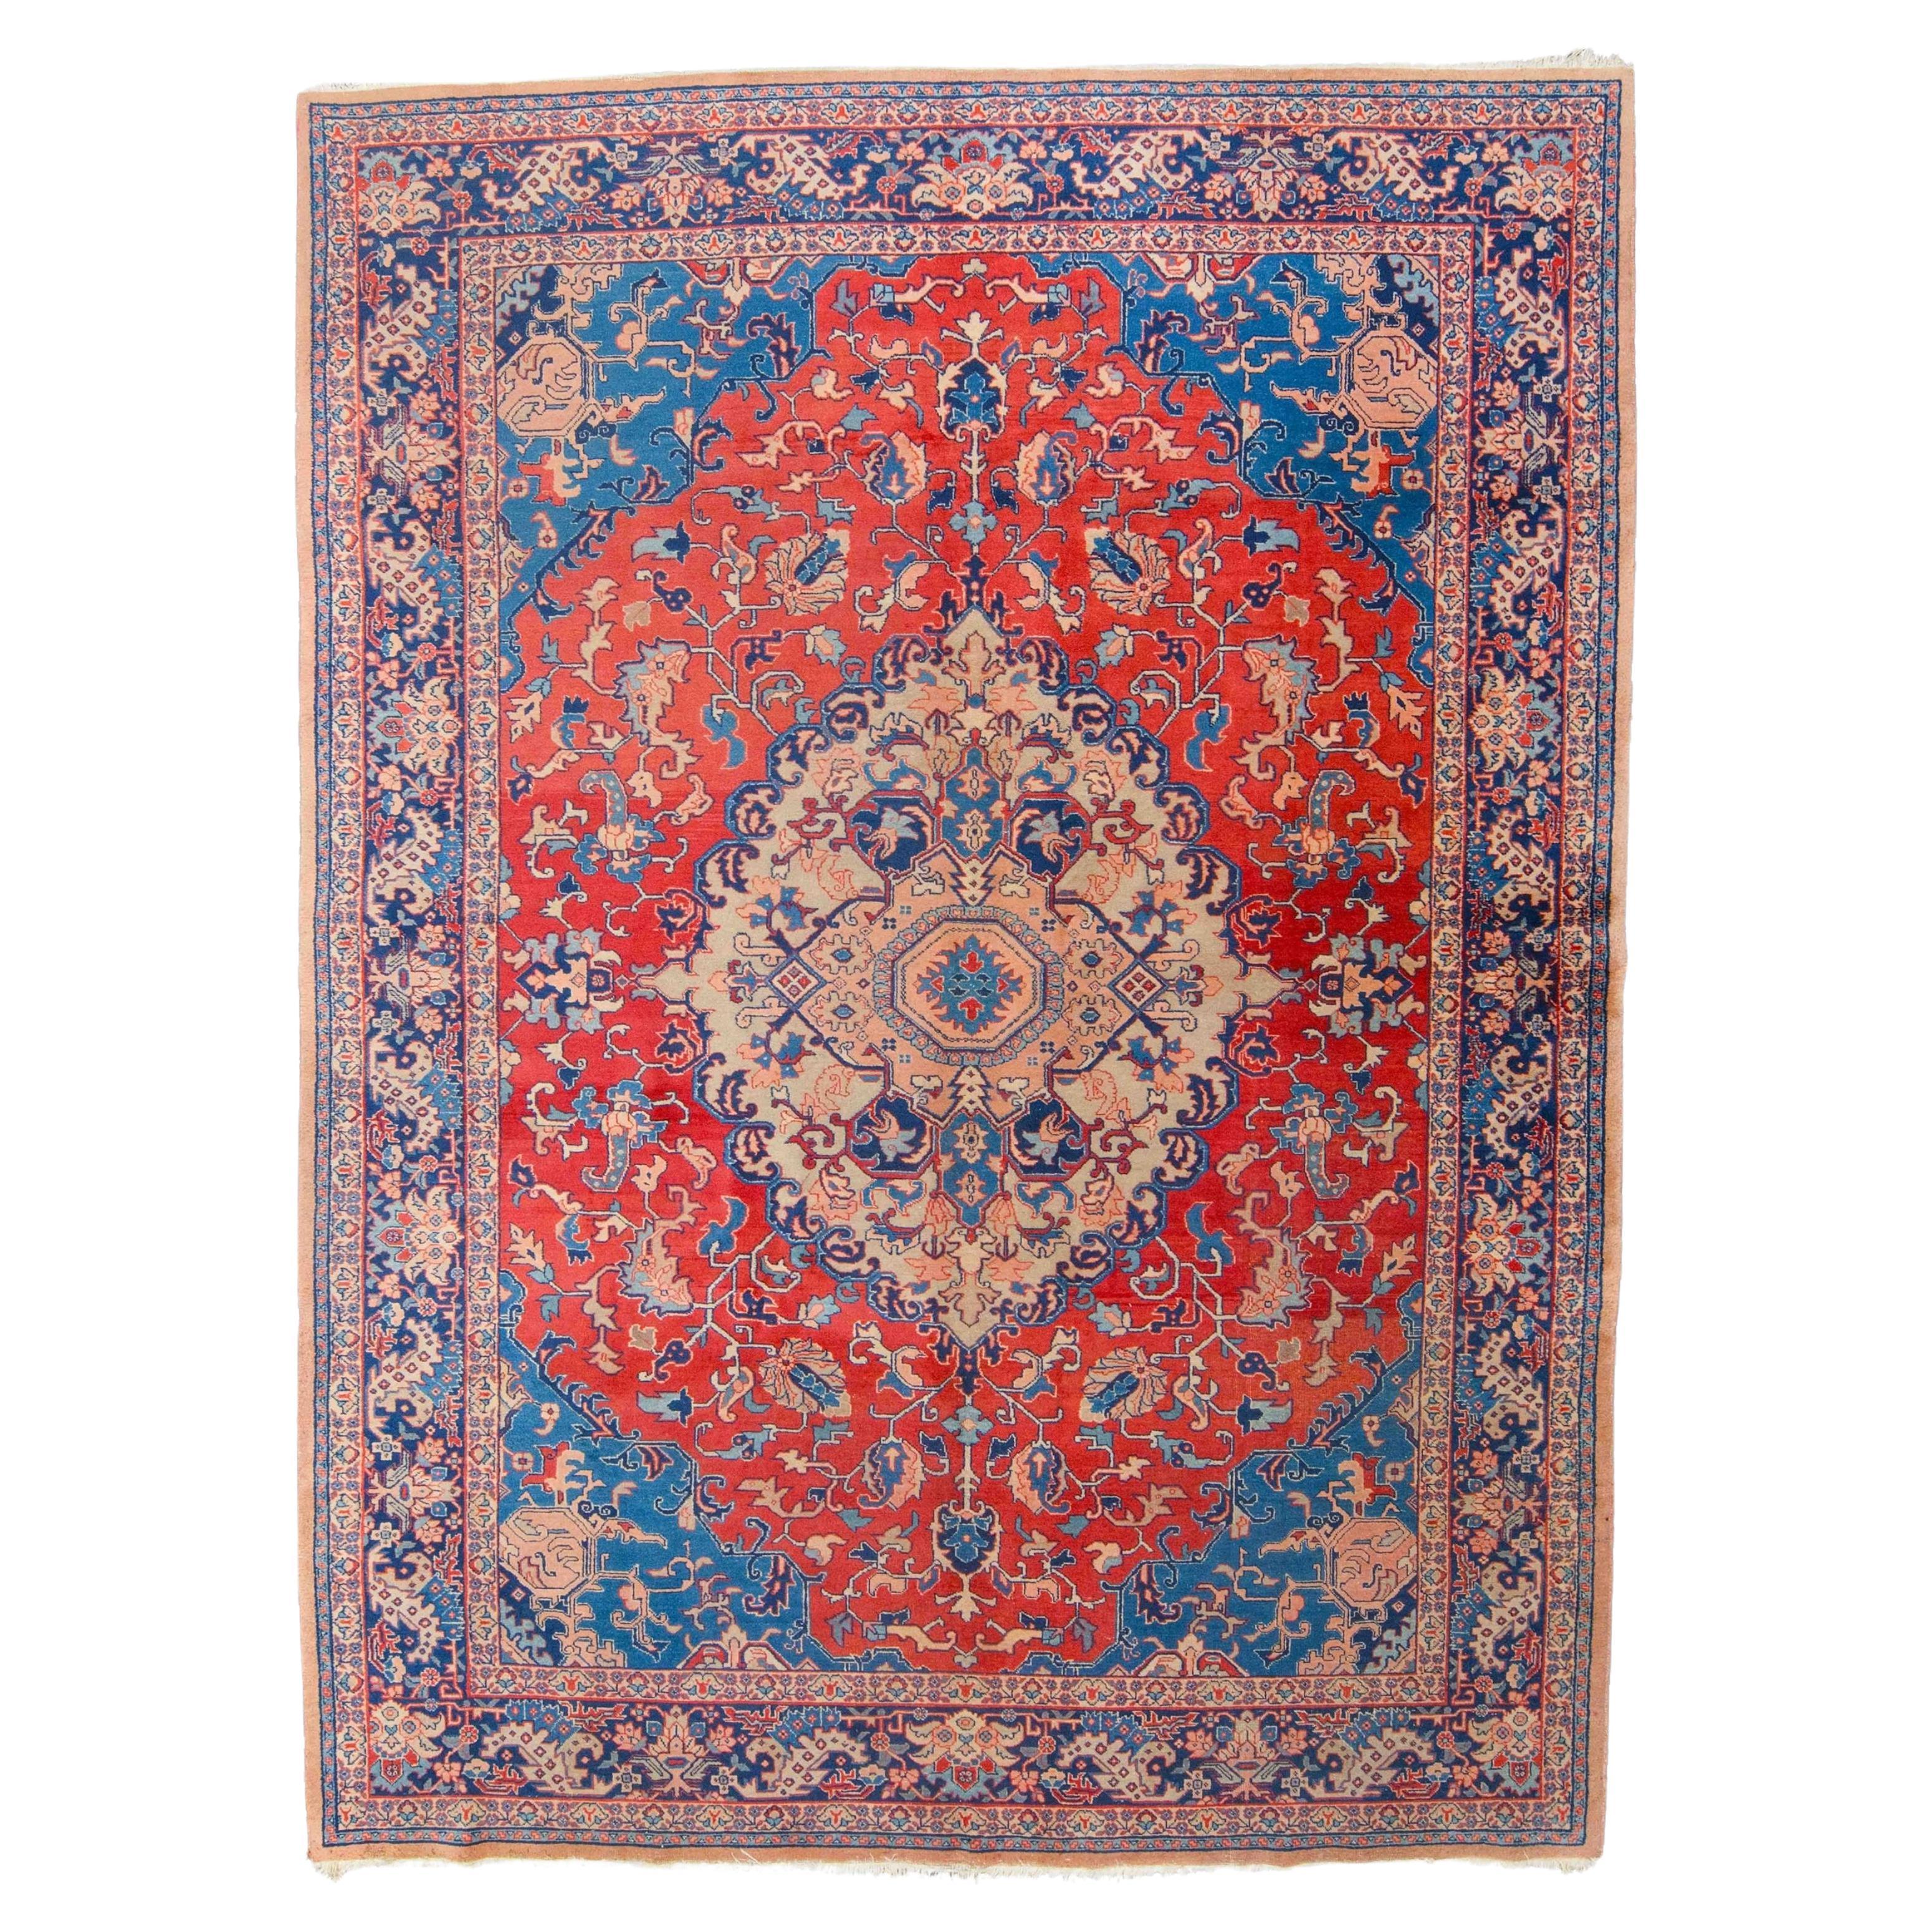 Antique Tabriz Rug - Late of 19th Century Tebriz Rug in Good Condition For Sale